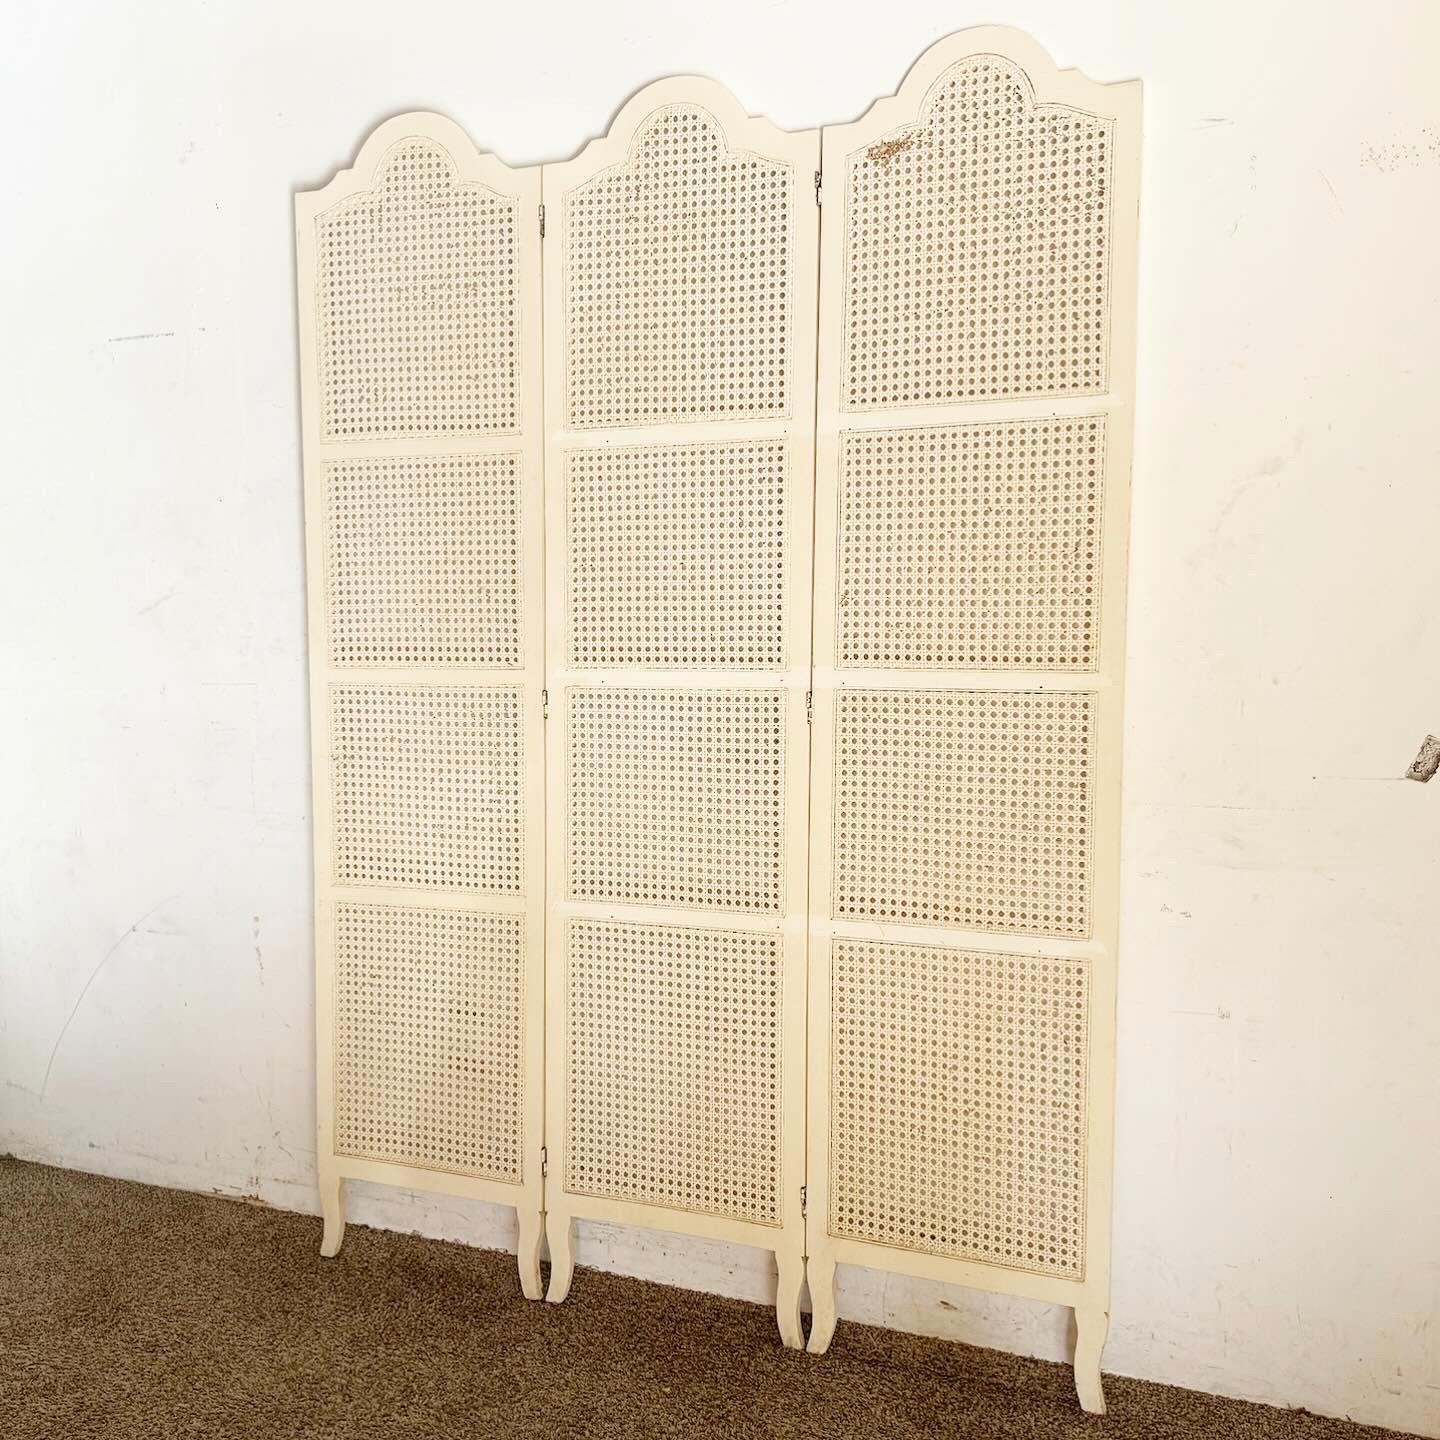 Enhance your space with the Regency Chic Off White Cane Room Divider/Screen. This elegant divider offers both privacy and style, featuring a sophisticated off-white finish and intricate cane work. Its semi-transparent design allows light to pass